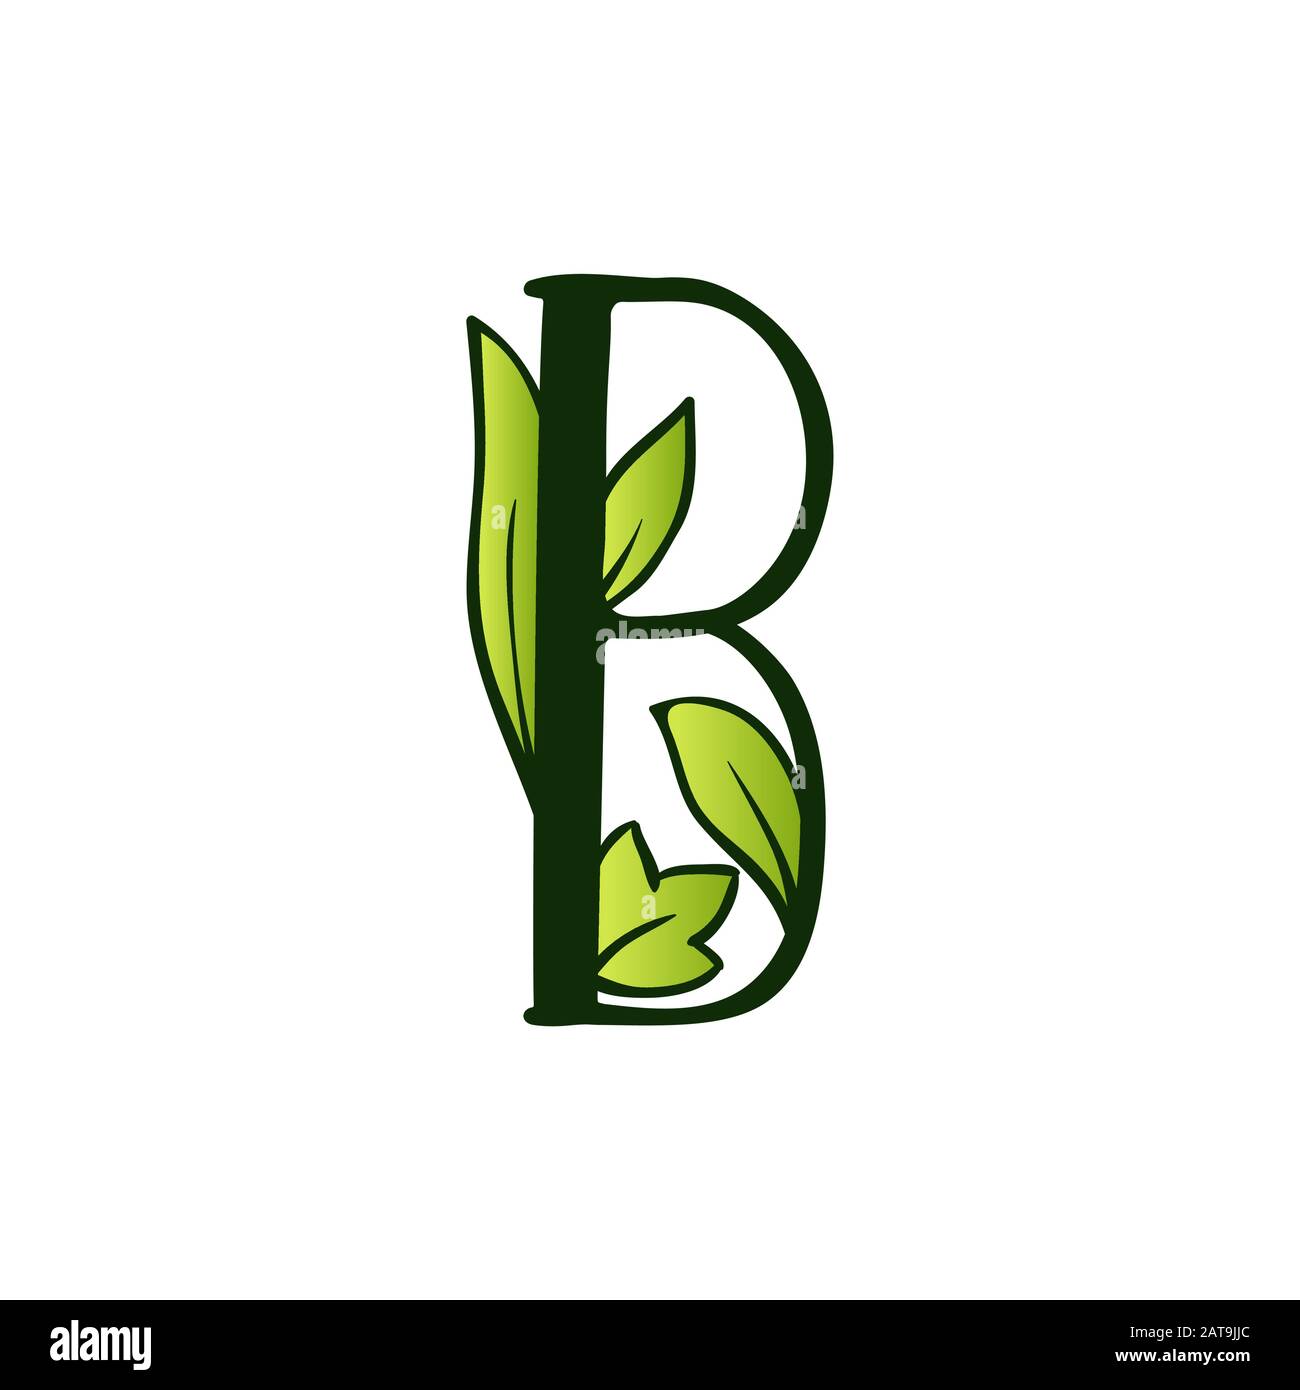 Green Doodling Eco Alphabet Letter B.Type with Leaves. Isolated Latin Uppercase. Typography Bold Spring Letter or Doodle abc Characters for Monogram Words and Logo. Stock Vector